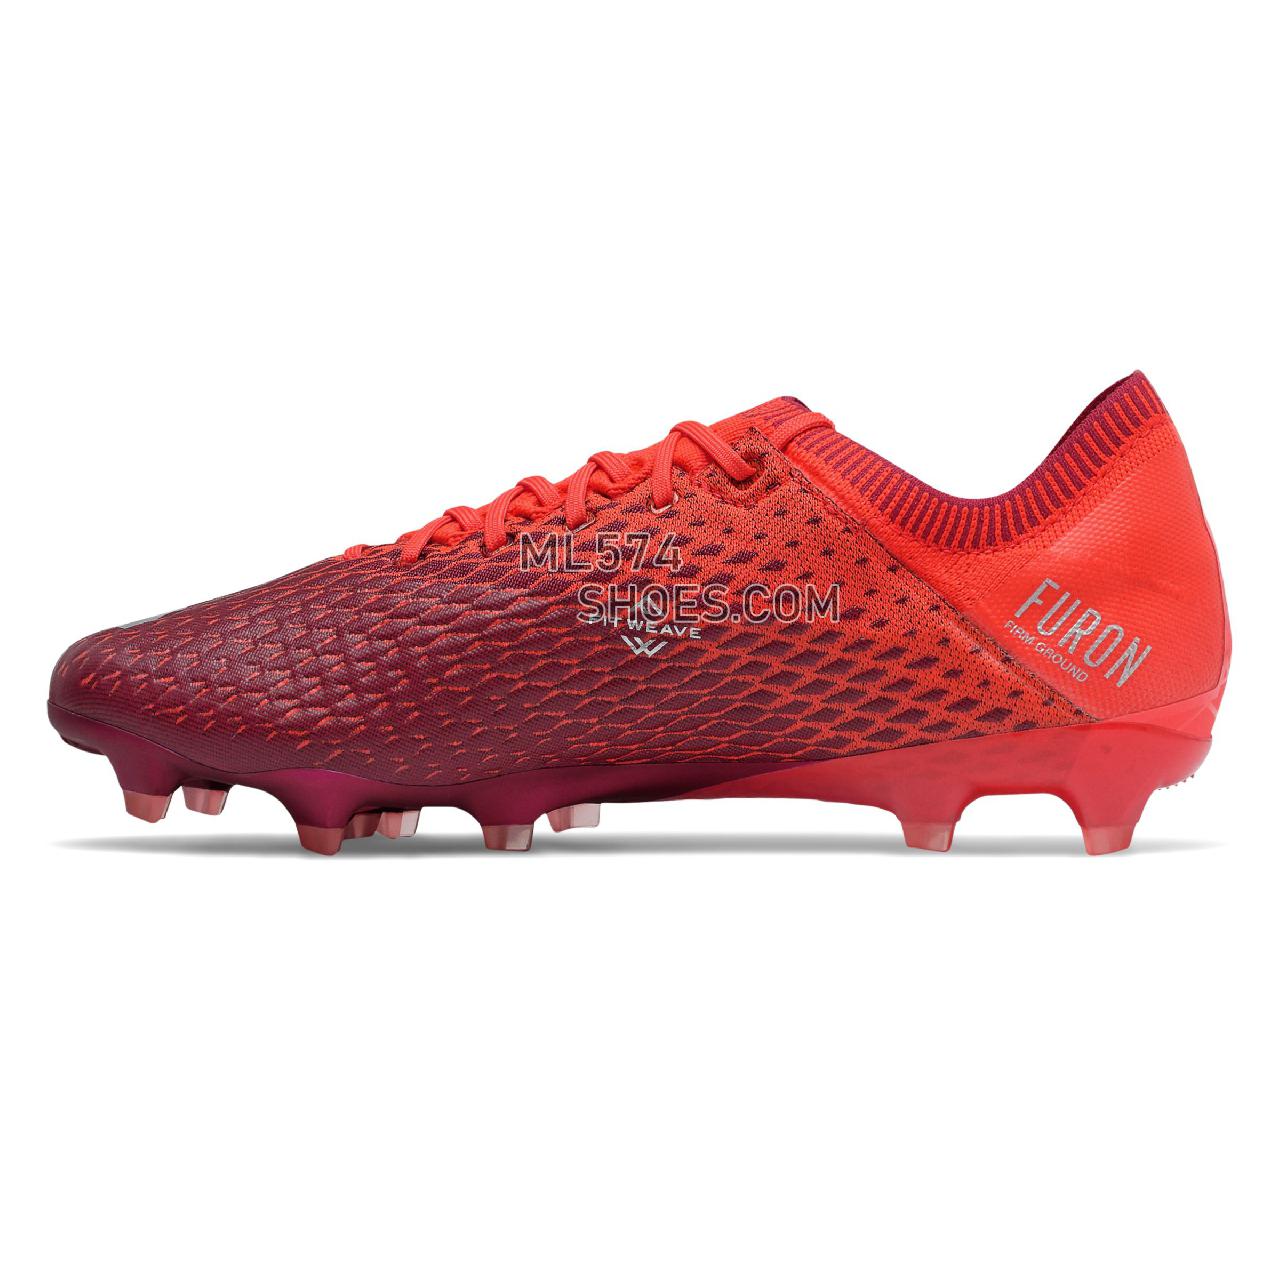 New Balance Furon v6 Pro FG - Men's Soccer - Neo Flame with Neo Crimson and Garnet - MSF1FFC6